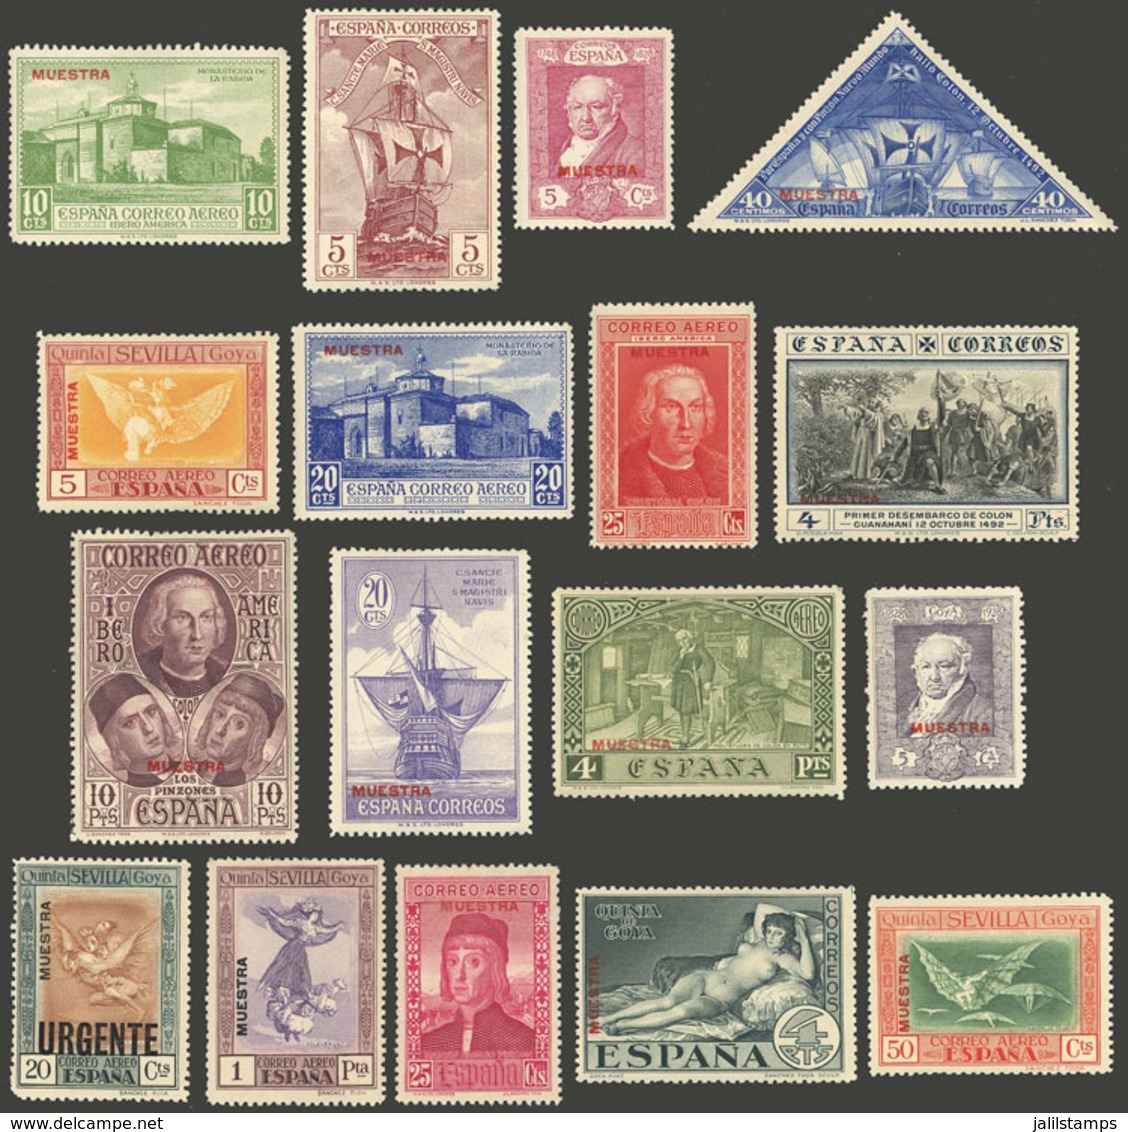 SPAIN: 17 Stamps With MUESTRA Overprint, Few With Minor Faults, Almost All Of Excellent Quality! - Collezioni